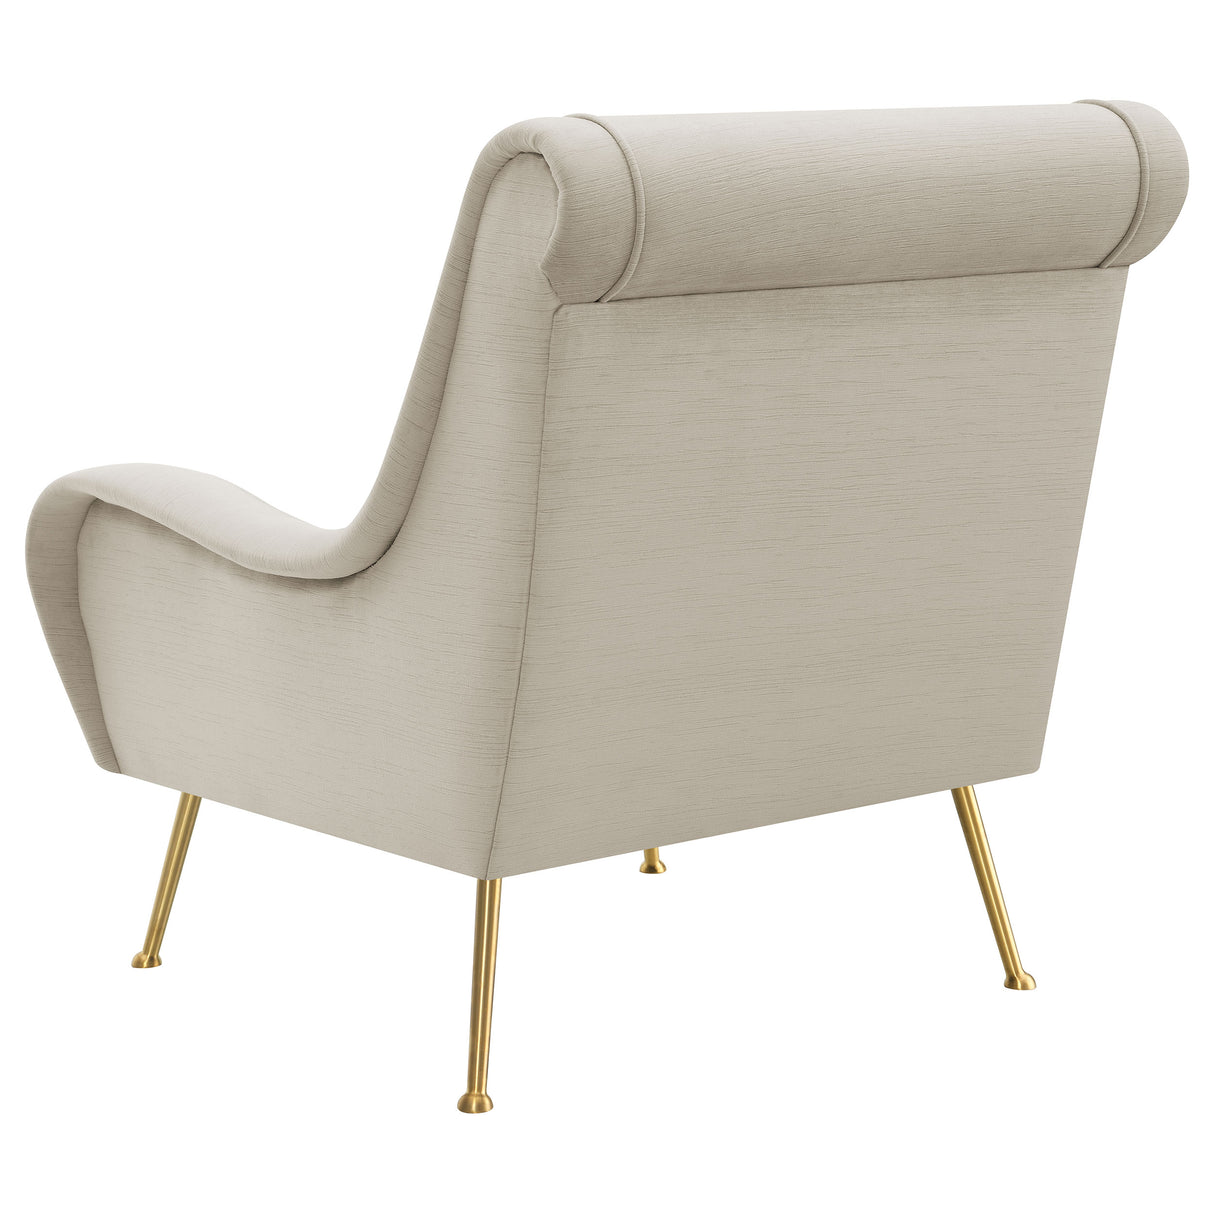 Accent Chair - Ricci Upholstered Saddle Arms Accent Chair Stone and Gold